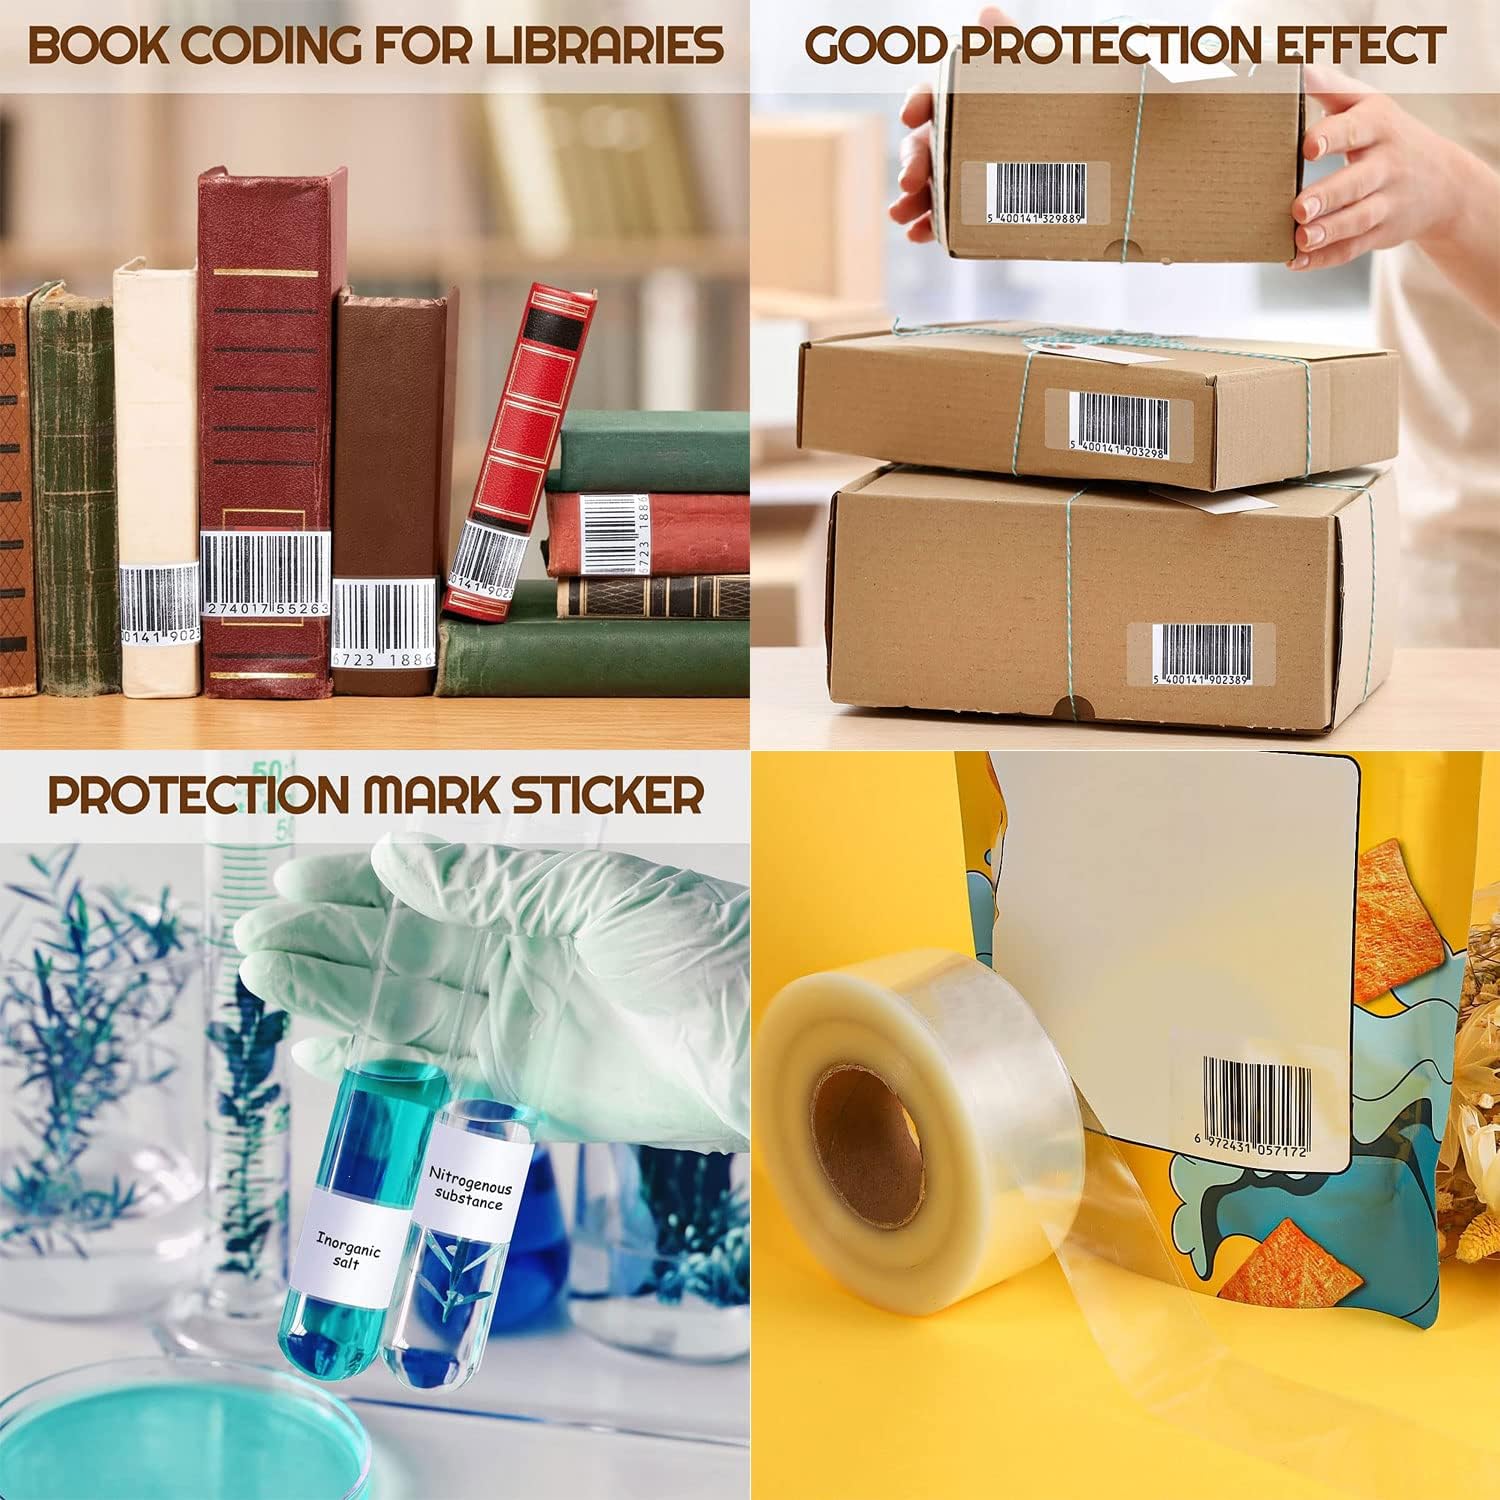 Label Protector Clear Label Protector Seals Waterproof Label for Protecting Barcodes, Numbers, Clothes, Food Label in Laboratory Library Office Supermarket (500 Pieces 3.1x1.18in)